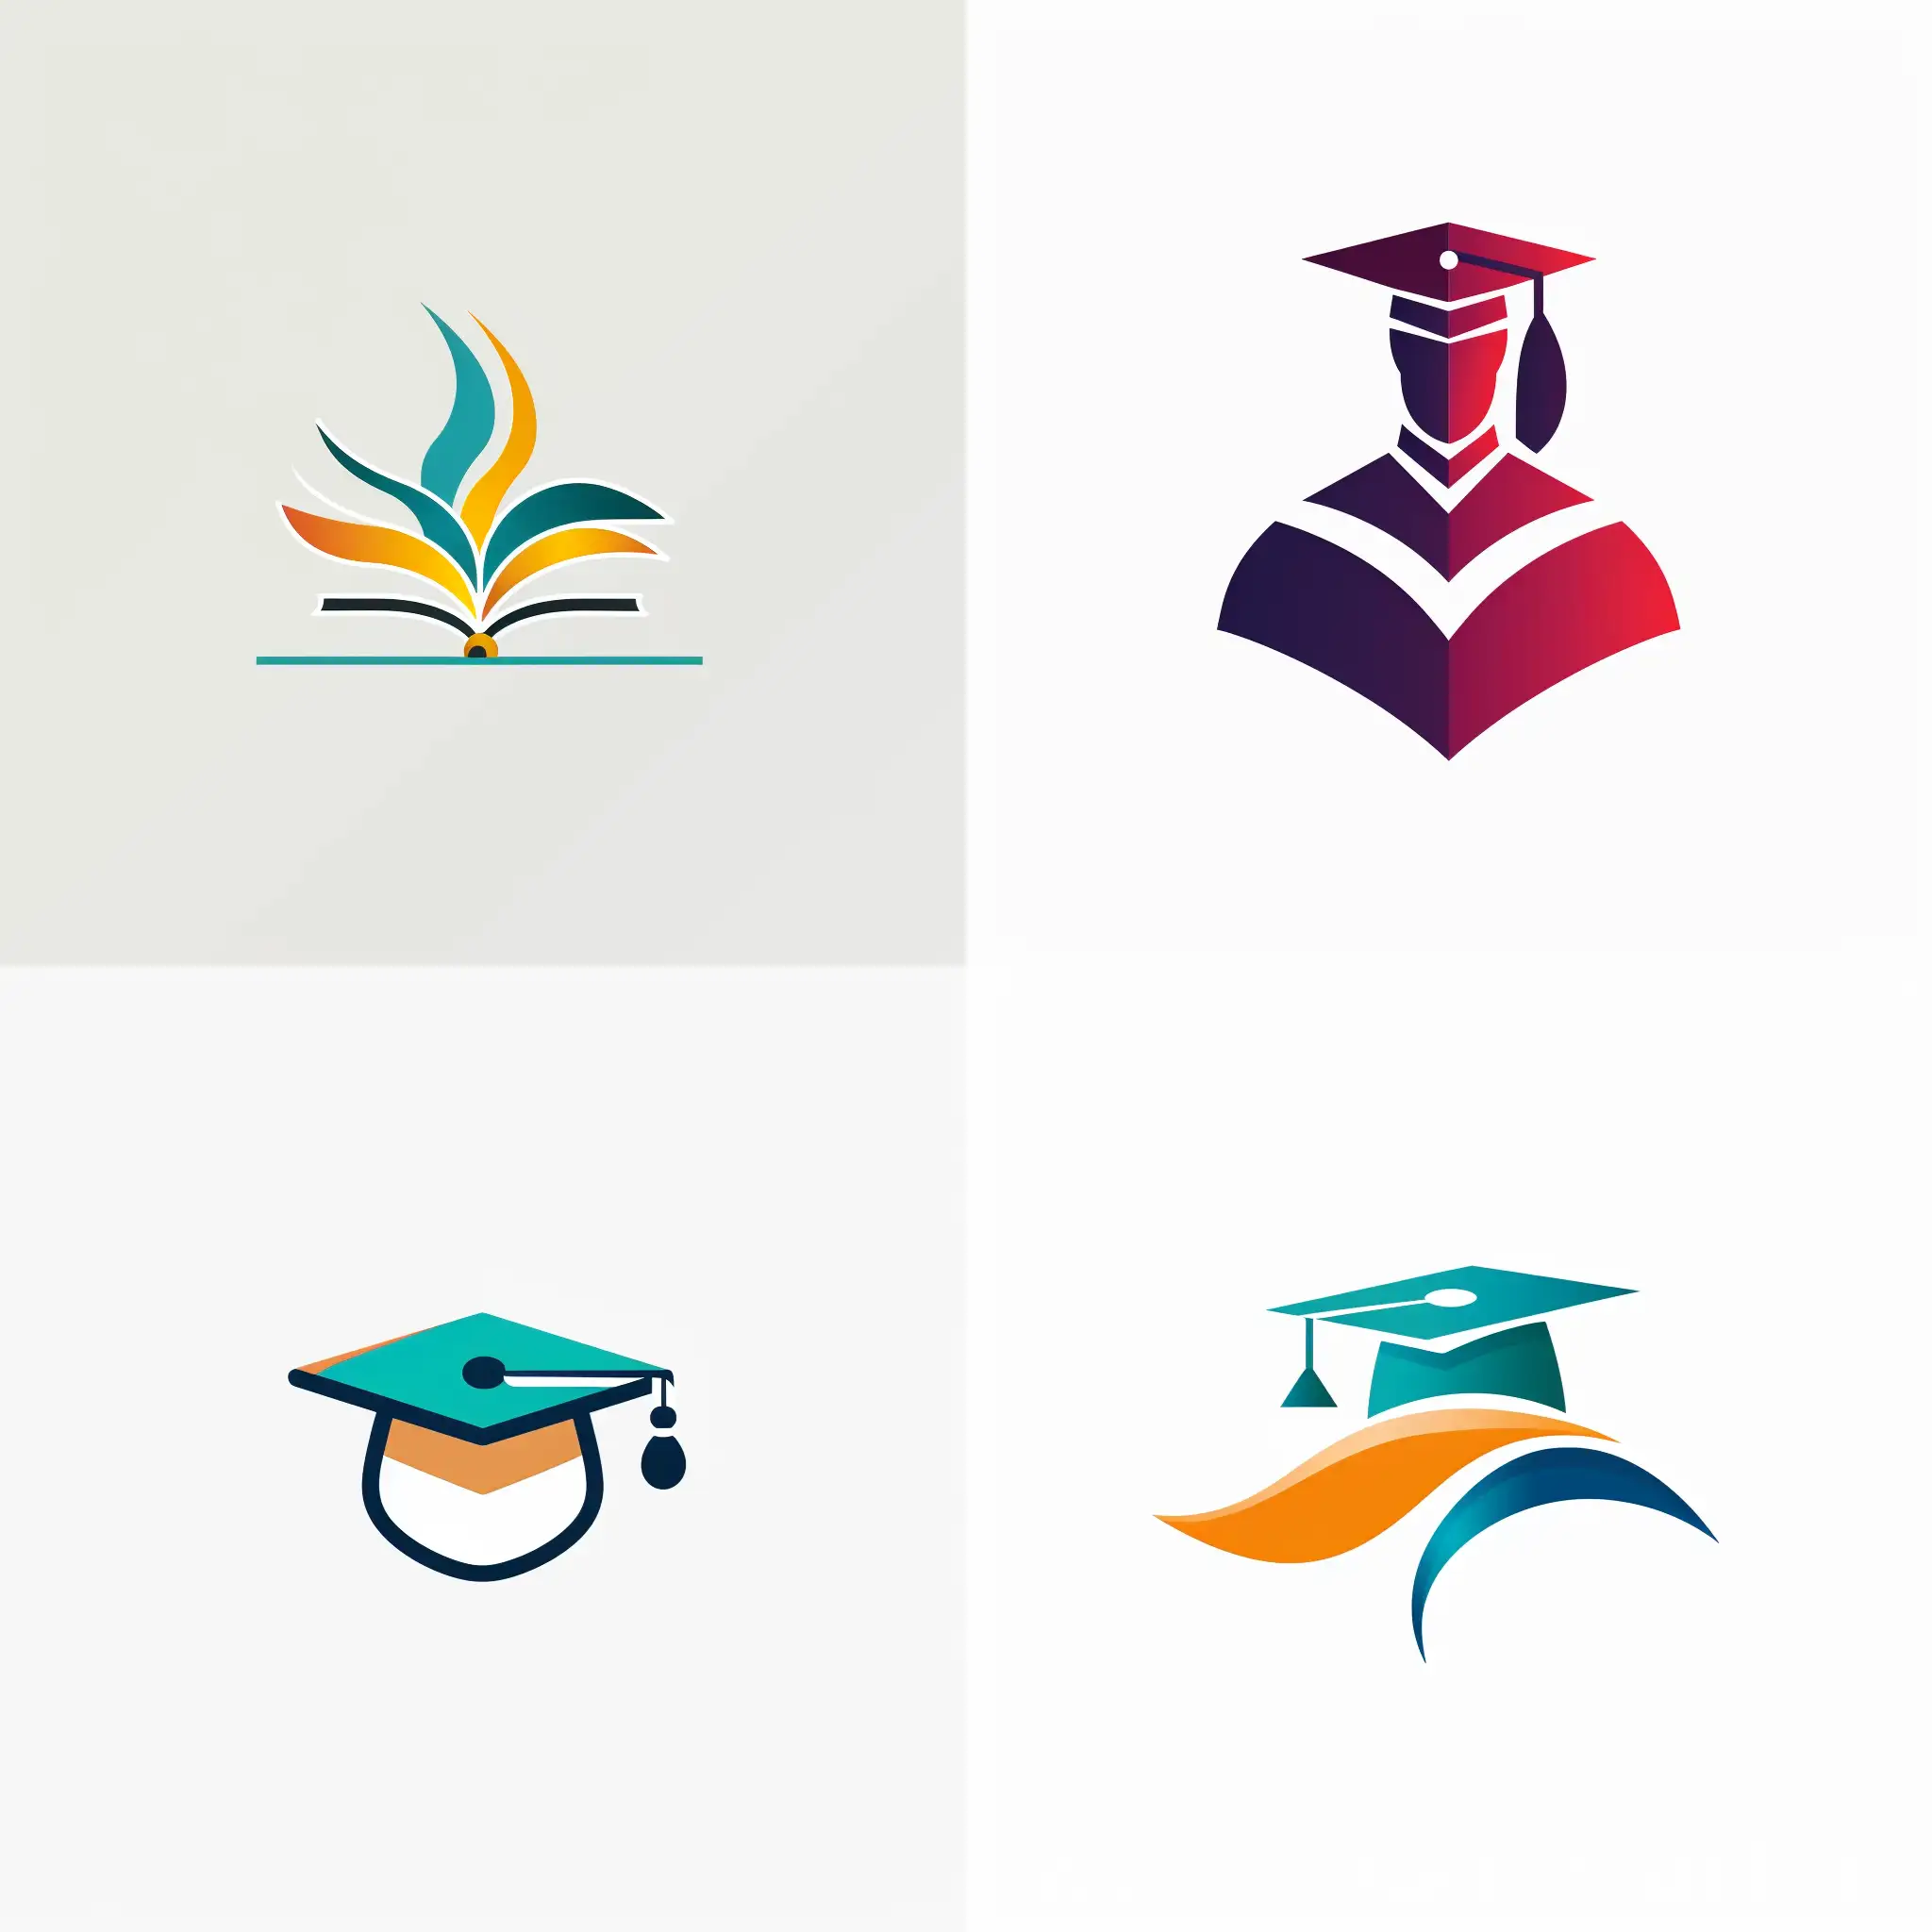 Design a minimalistic png logo for a new educational blog and platform called "Bawbat Al-Furas." This platform aims to provide comprehensive information on scholarships, work opportunities, internships, and various educational resources to help individuals succeed in their academic and professional endeavors. The logo should be visually appealing, incorporating elements that symbolize education, advancement, and accessibility. Consider using colors that convey energy, enthusiasm, and inclusivity, and ensure that the design resonates with the target audience of students, job seekers, and lifelong learners.